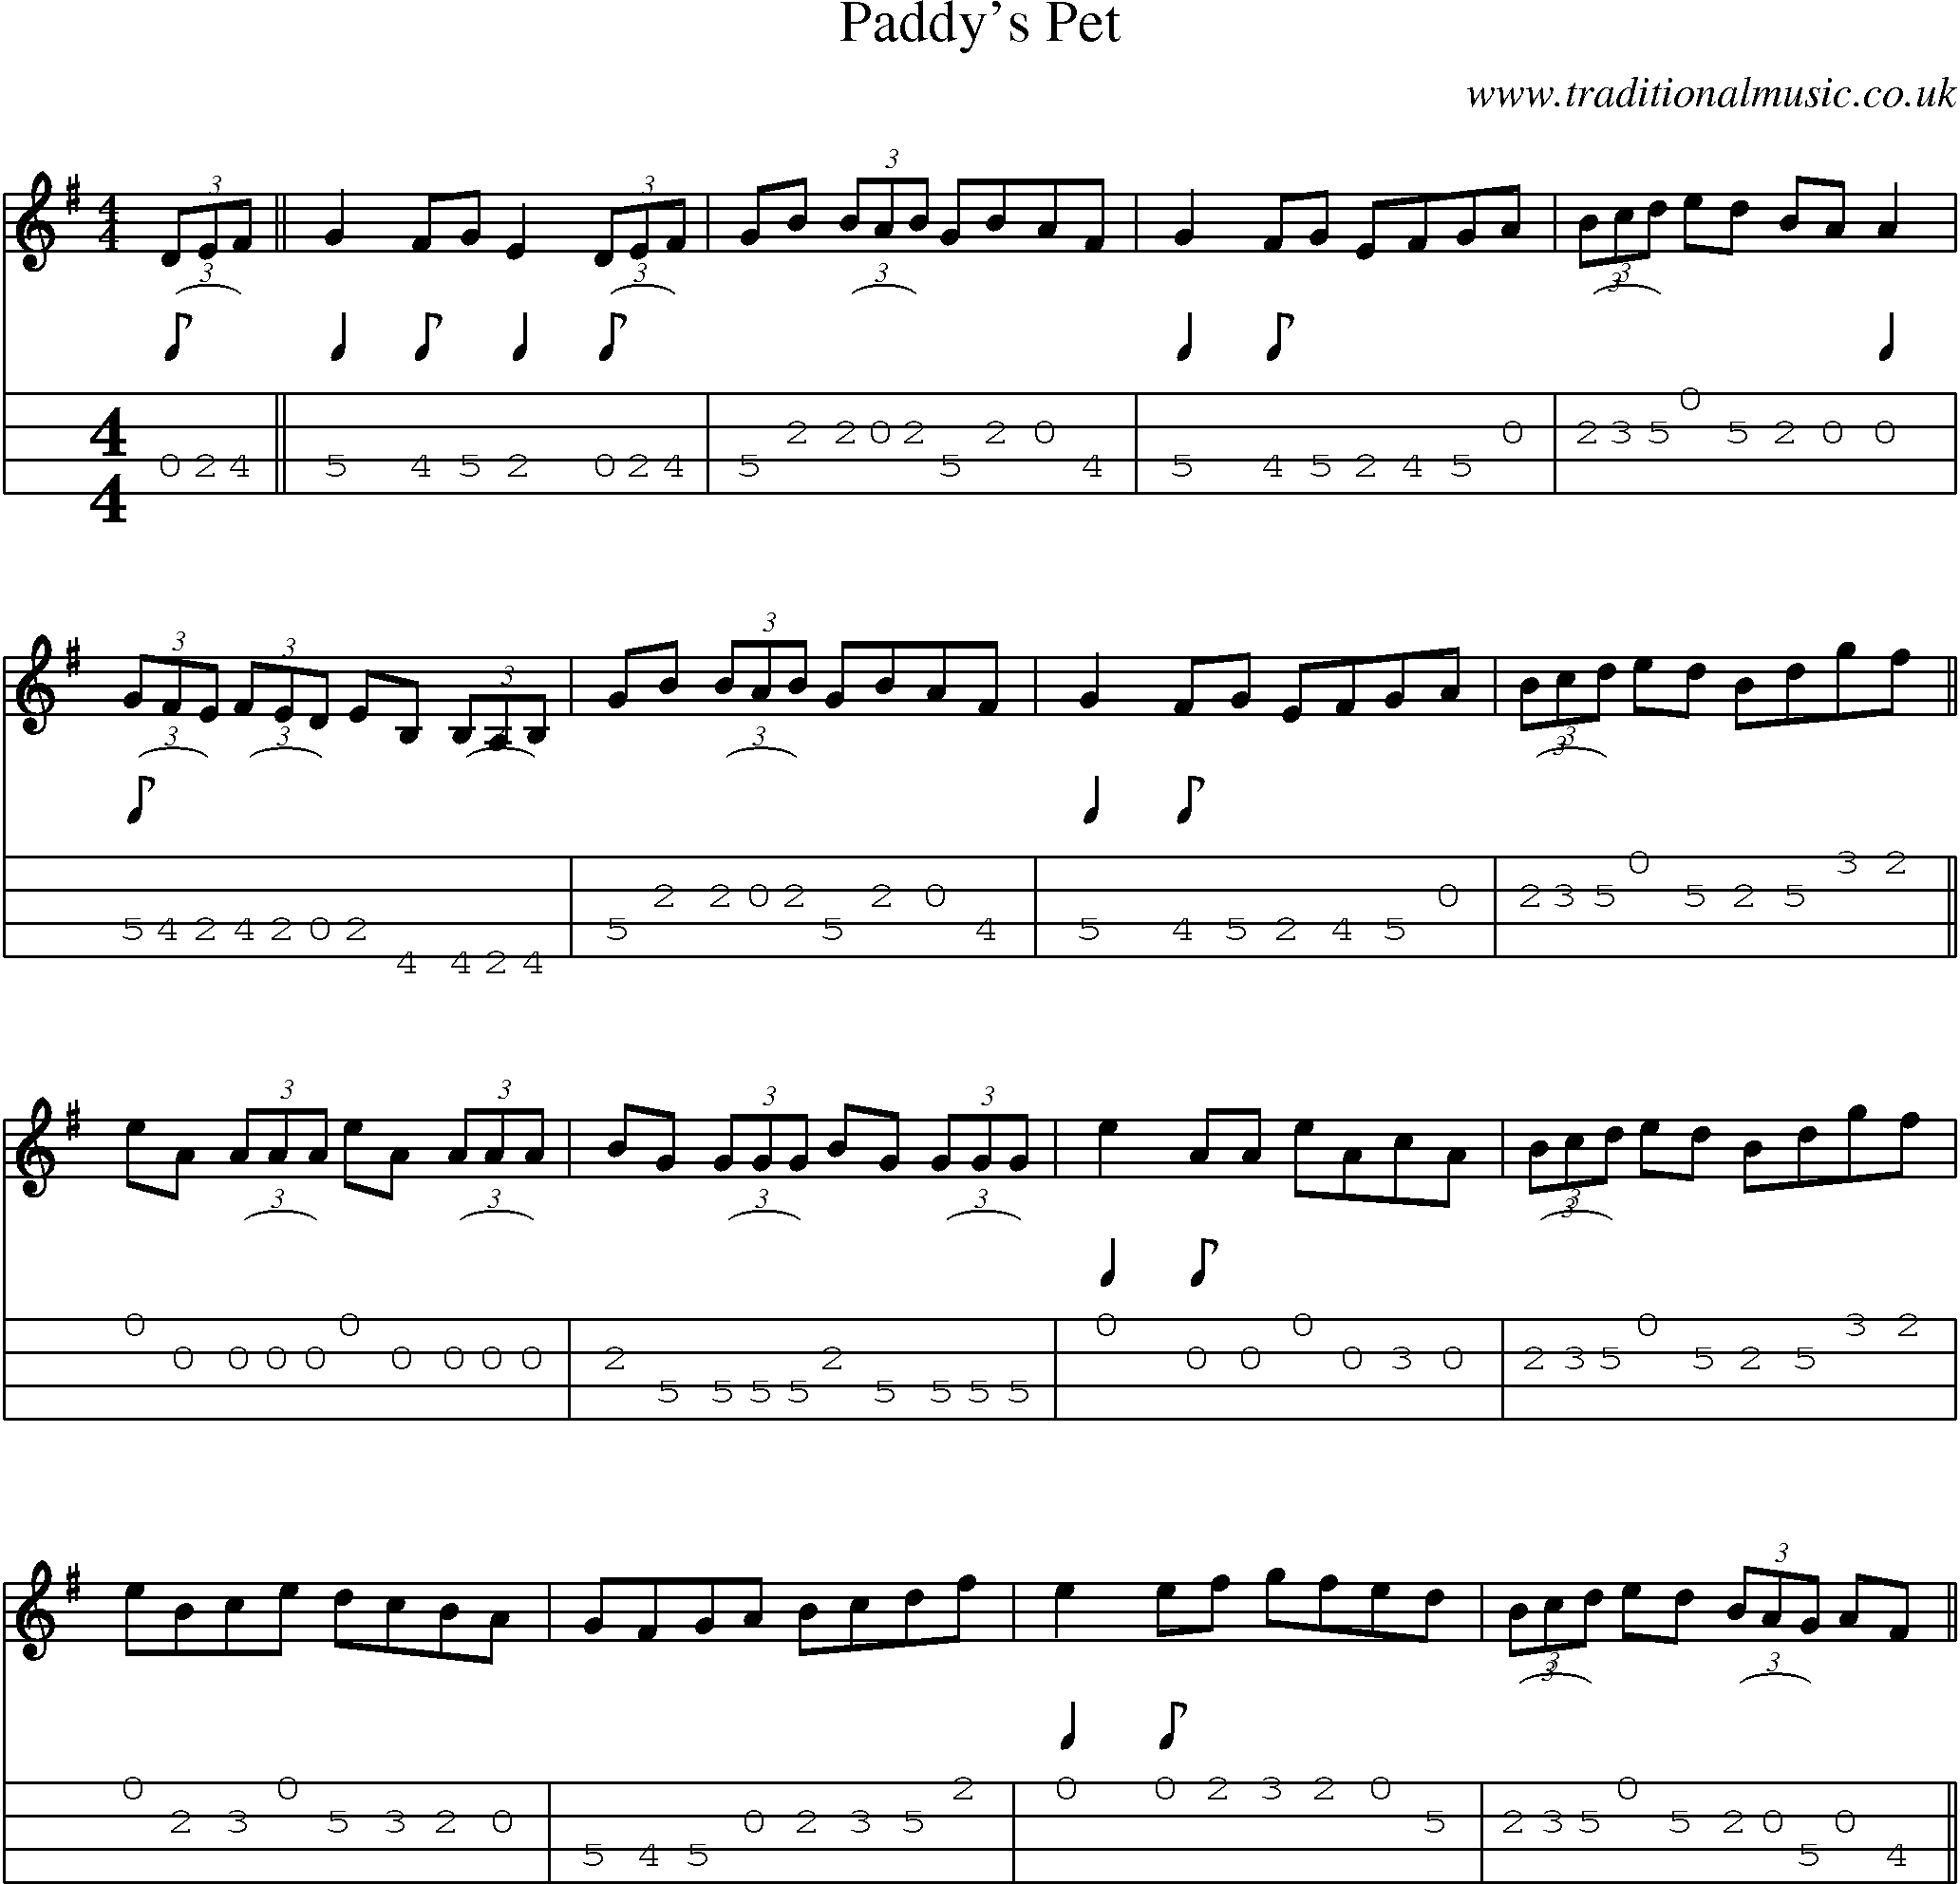 Music Score and Mandolin Tabs for Paddys Pet